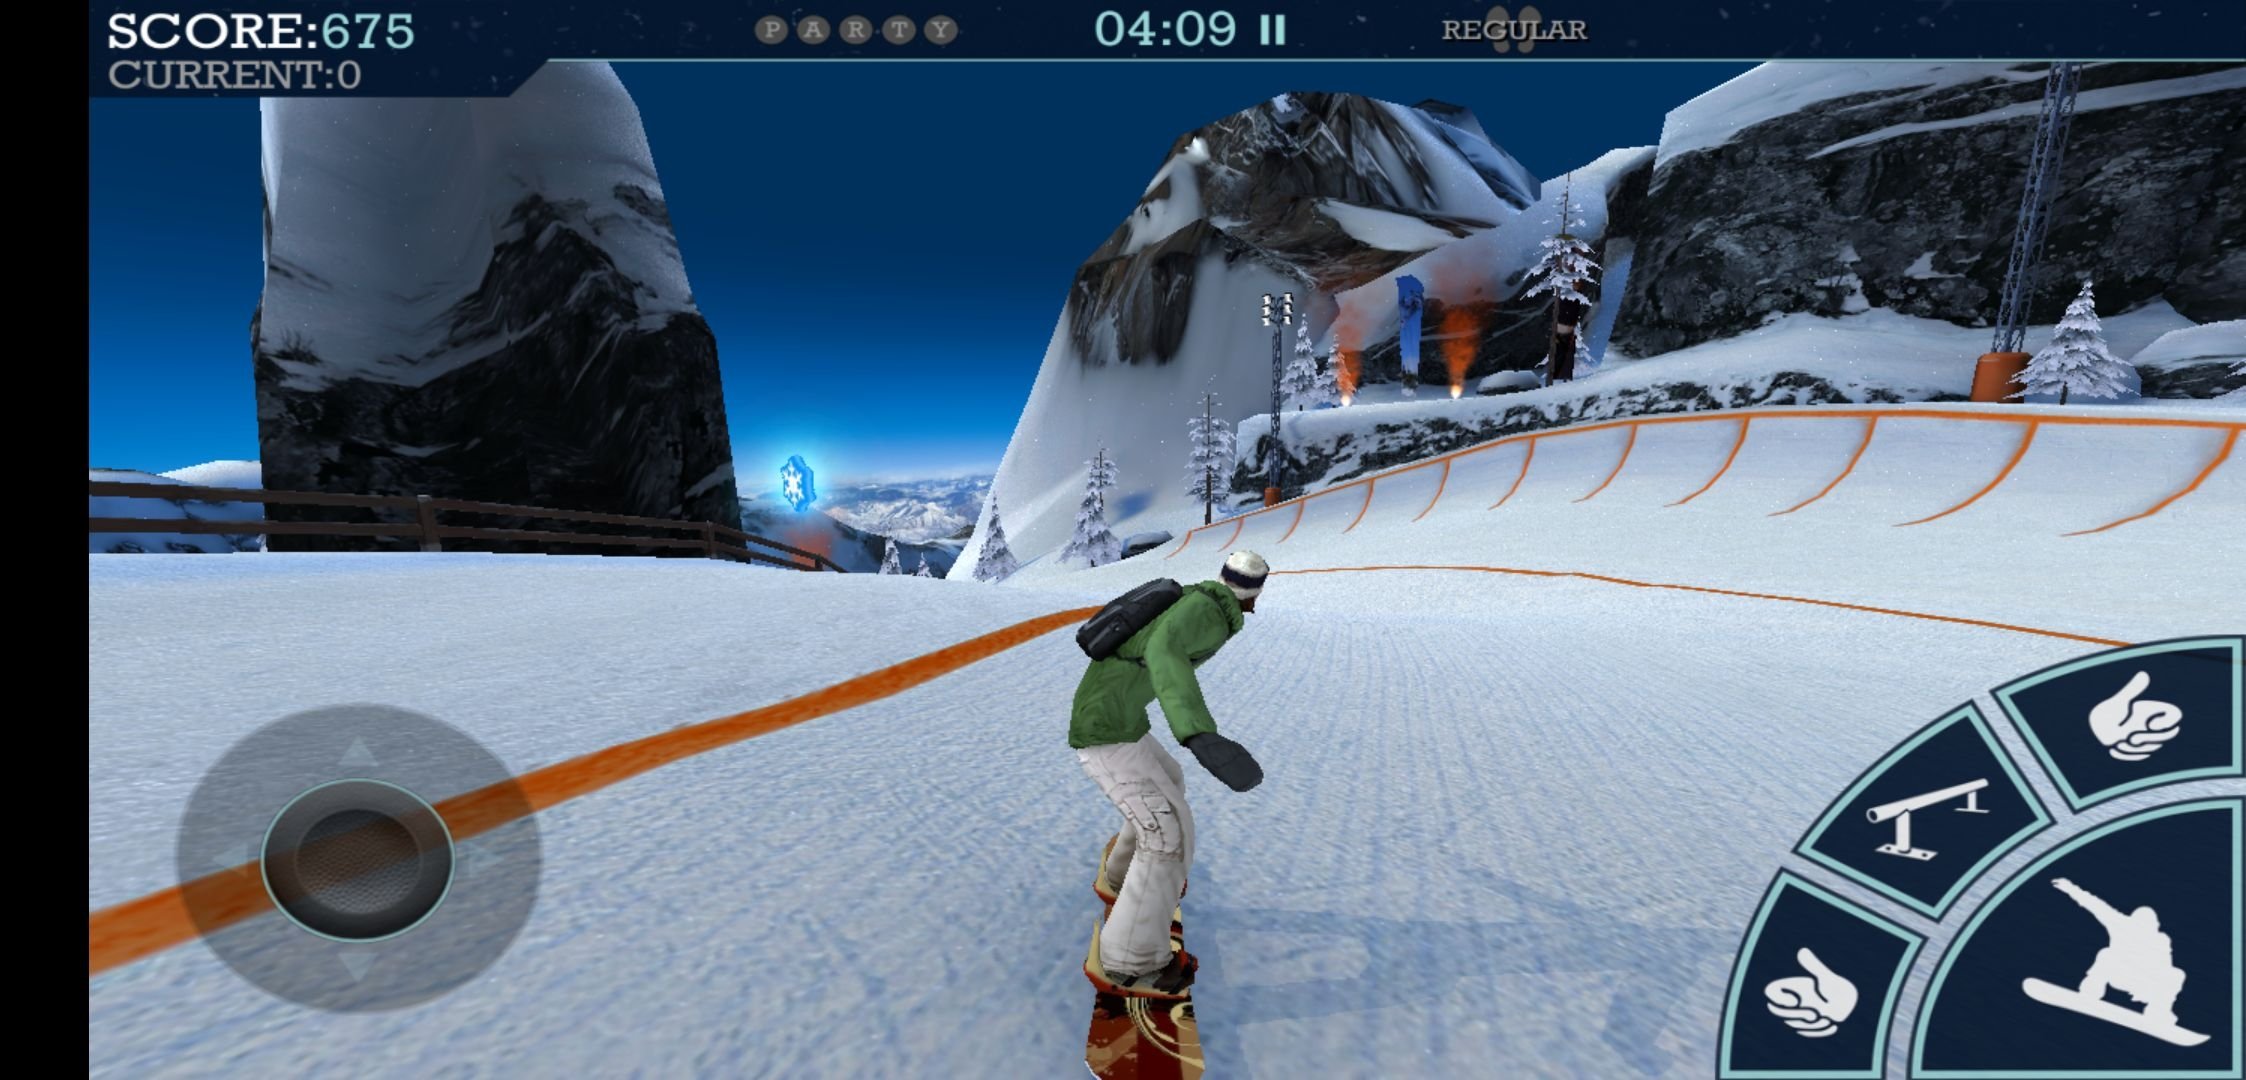 Take a risk Melbourne honey Snowboard Party 1.6.0 - Download for Android APK Free